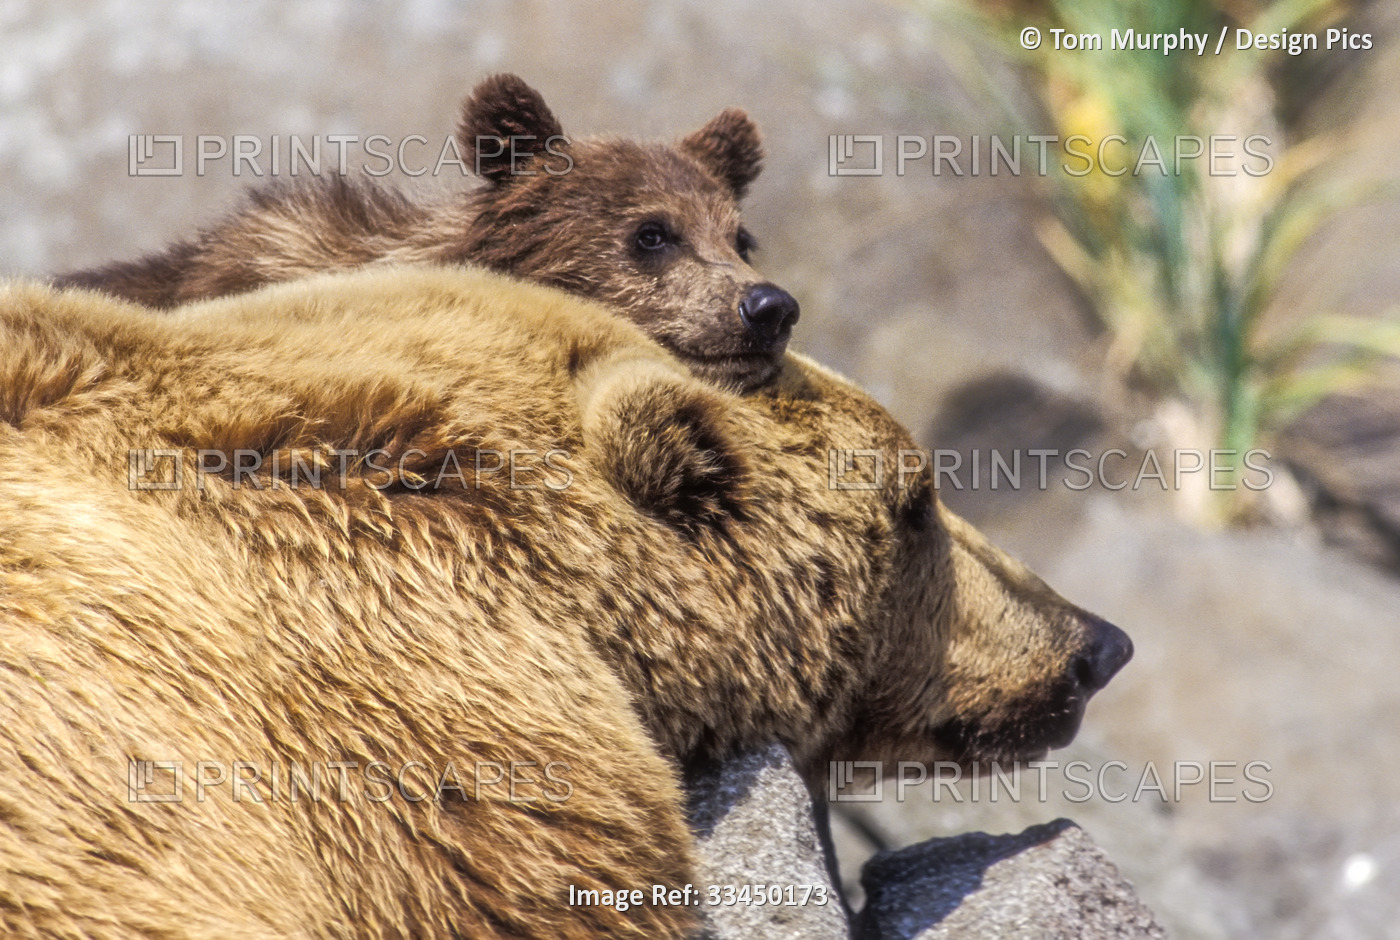 View taken from behind of a brown bear cub (Ursus arctos) resting against Mom's ...